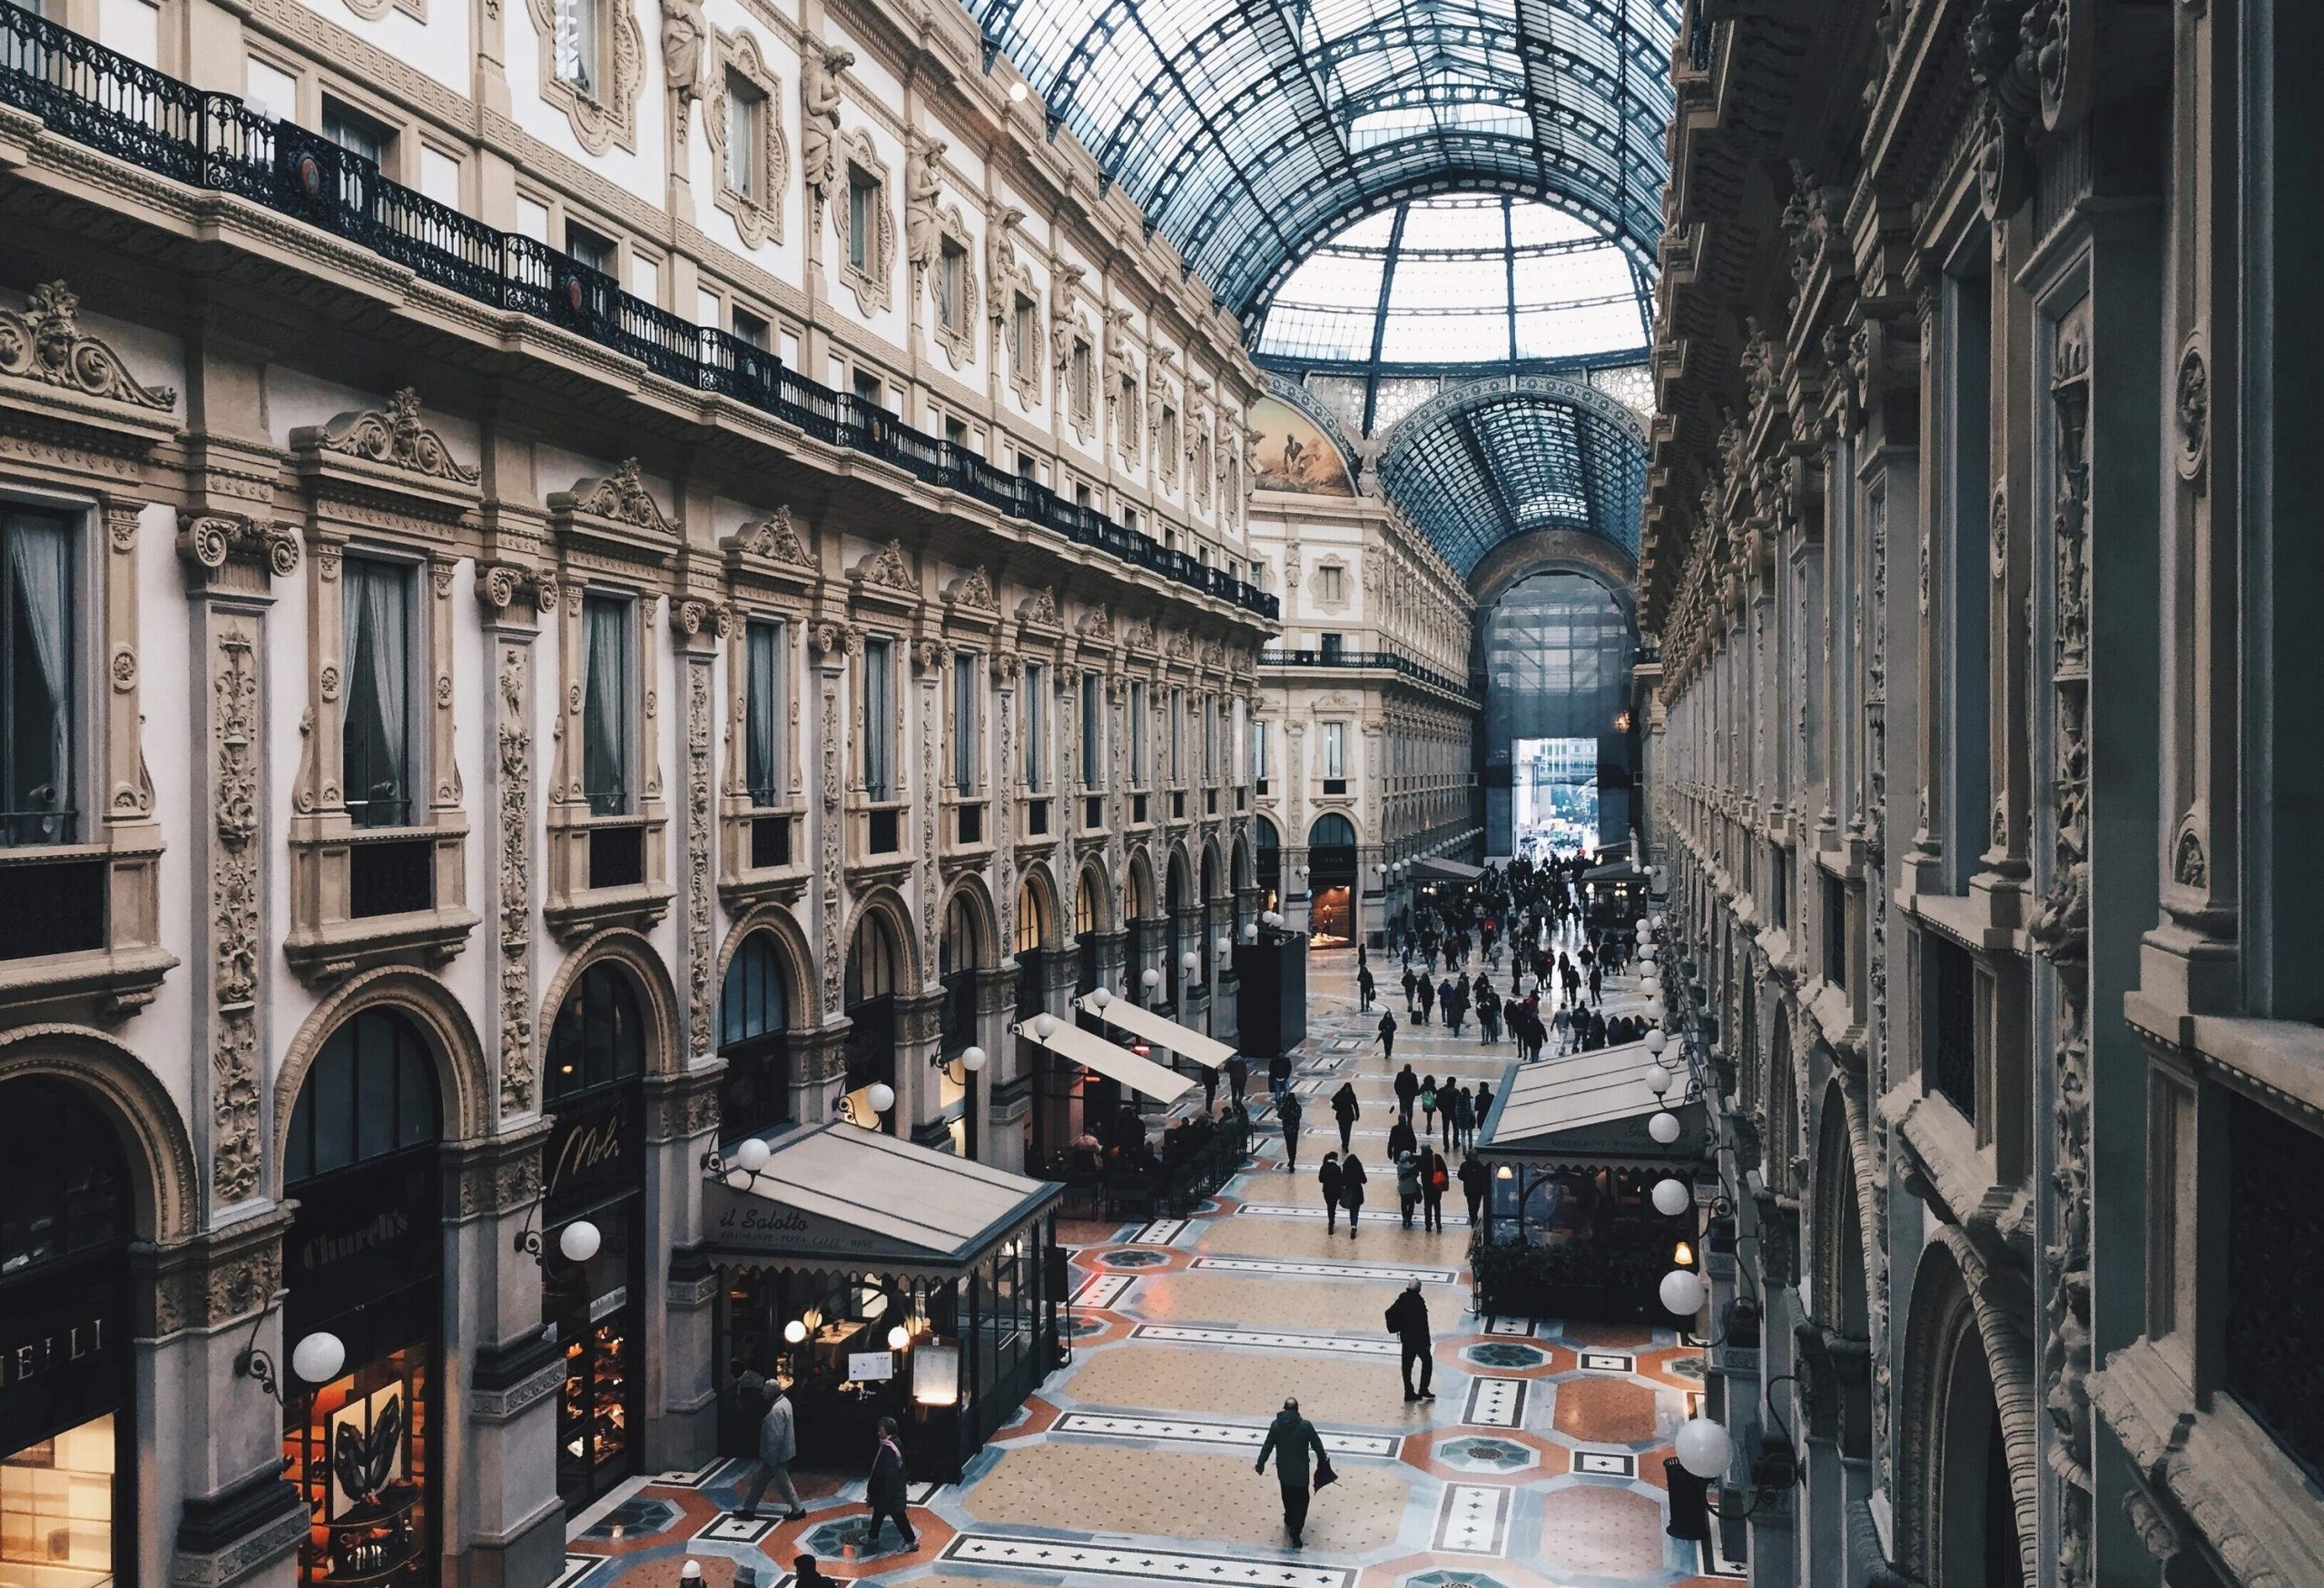 A historic mall in Milan boasts a stunning skylight that illuminates the elegant shops and busy crowds of people walking through this architectural masterpiece.